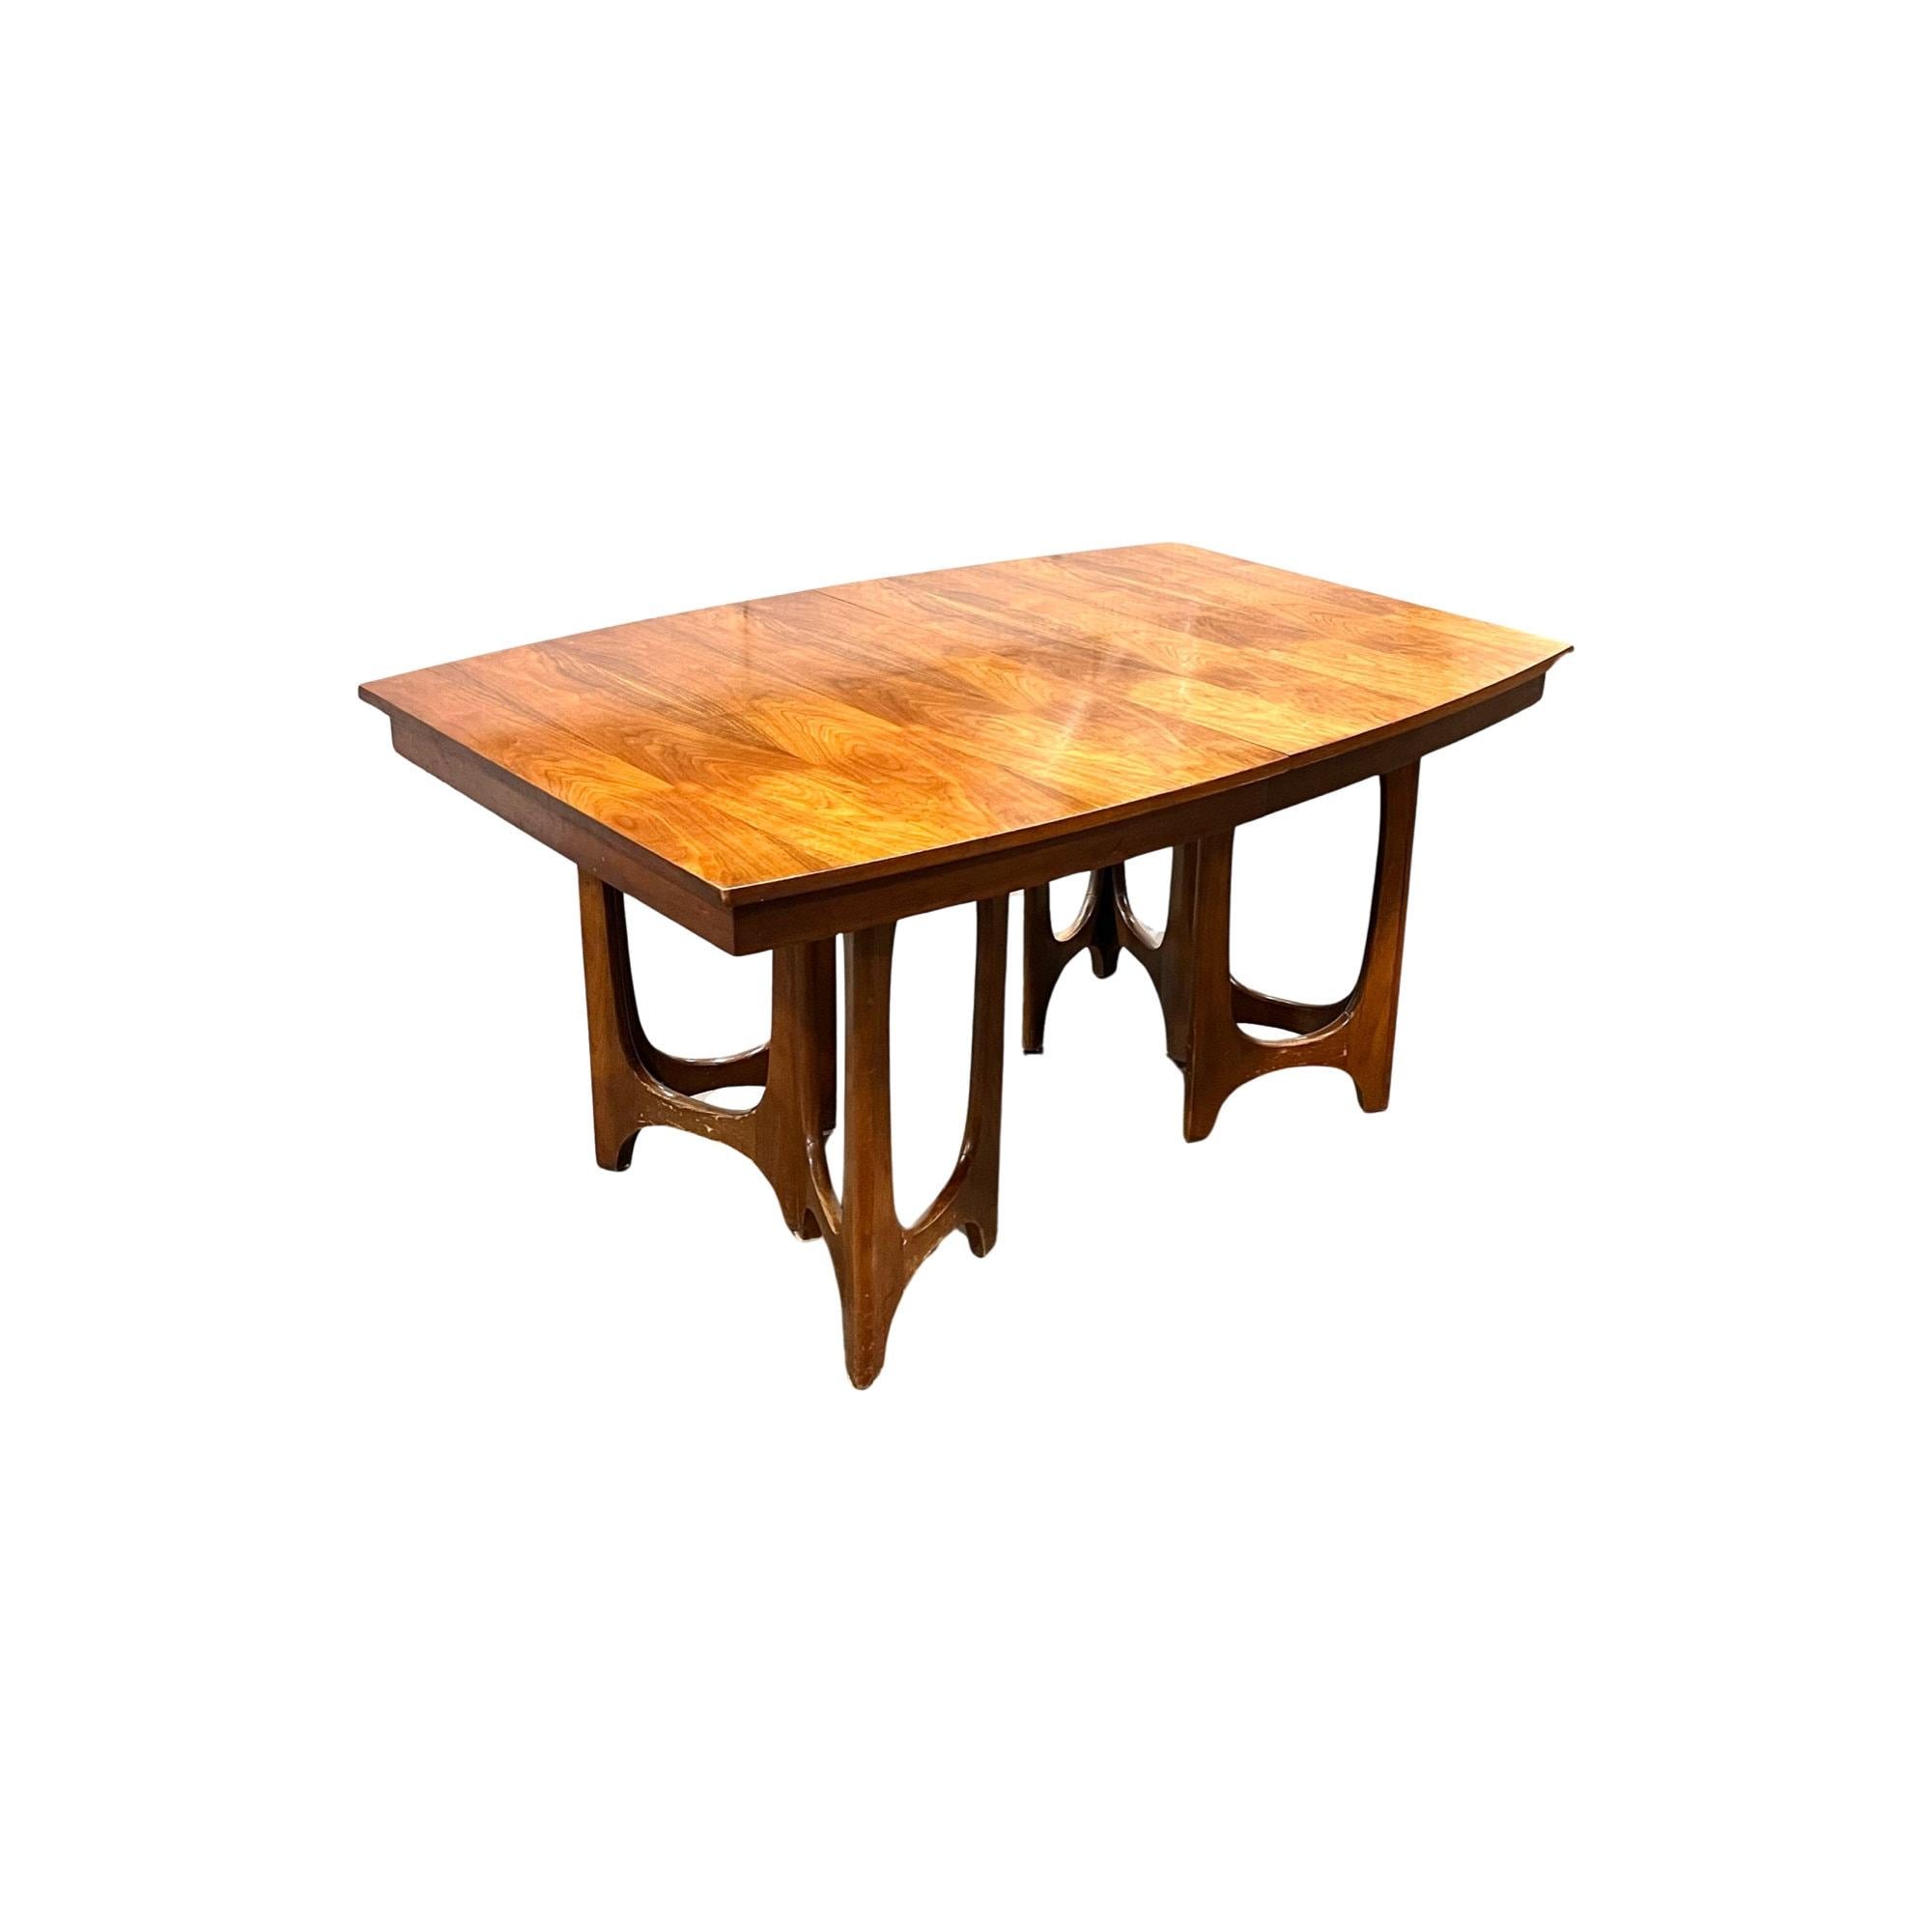 American Young Mfg Vintage Mid Century Modern Sculpted Pedestal Dining Table c. 1960s For Sale